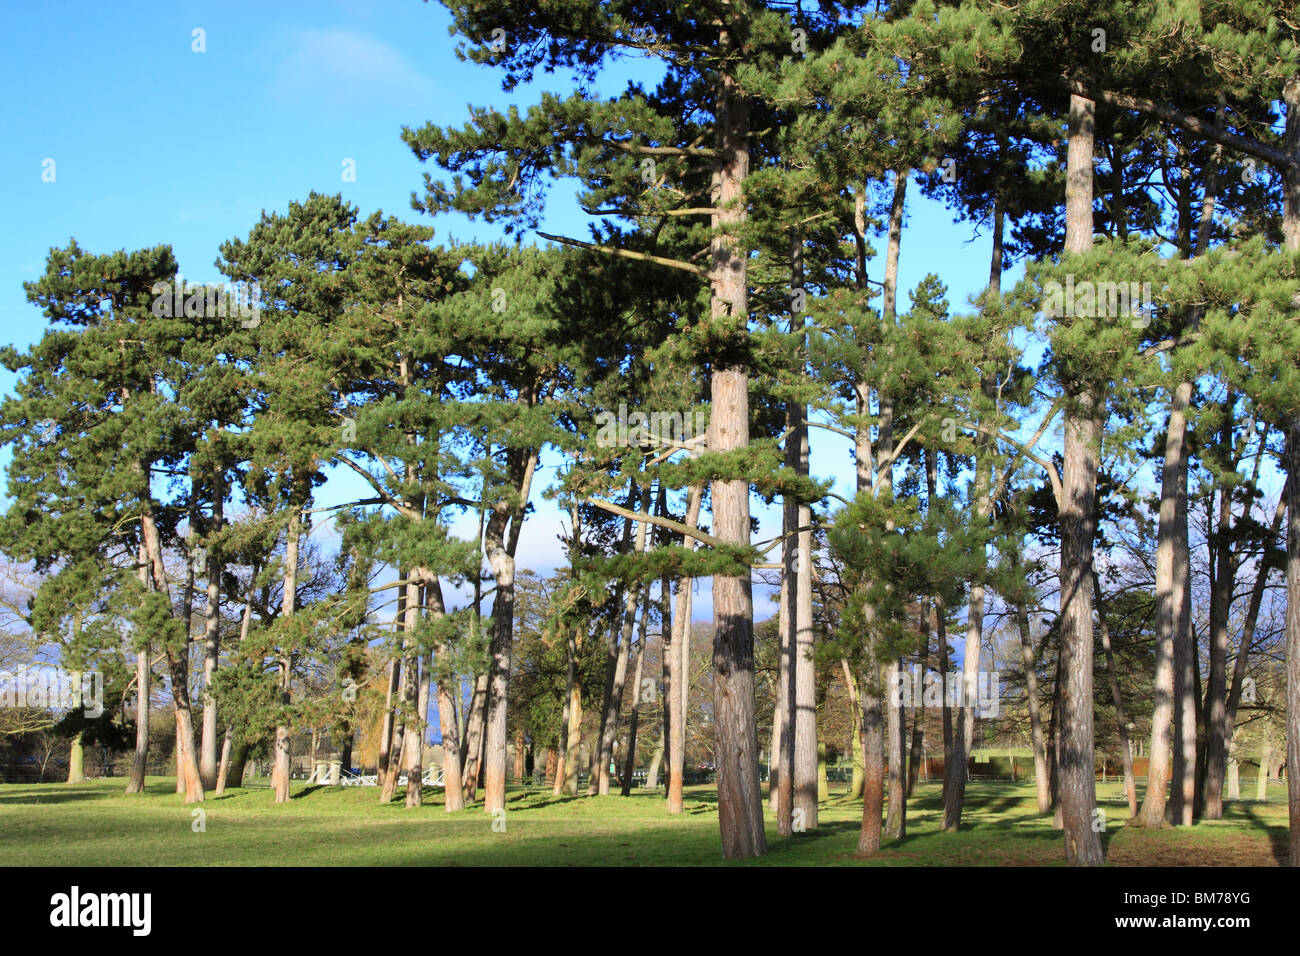 Pine trees in landscaped grounds, England, UK Stock Photo